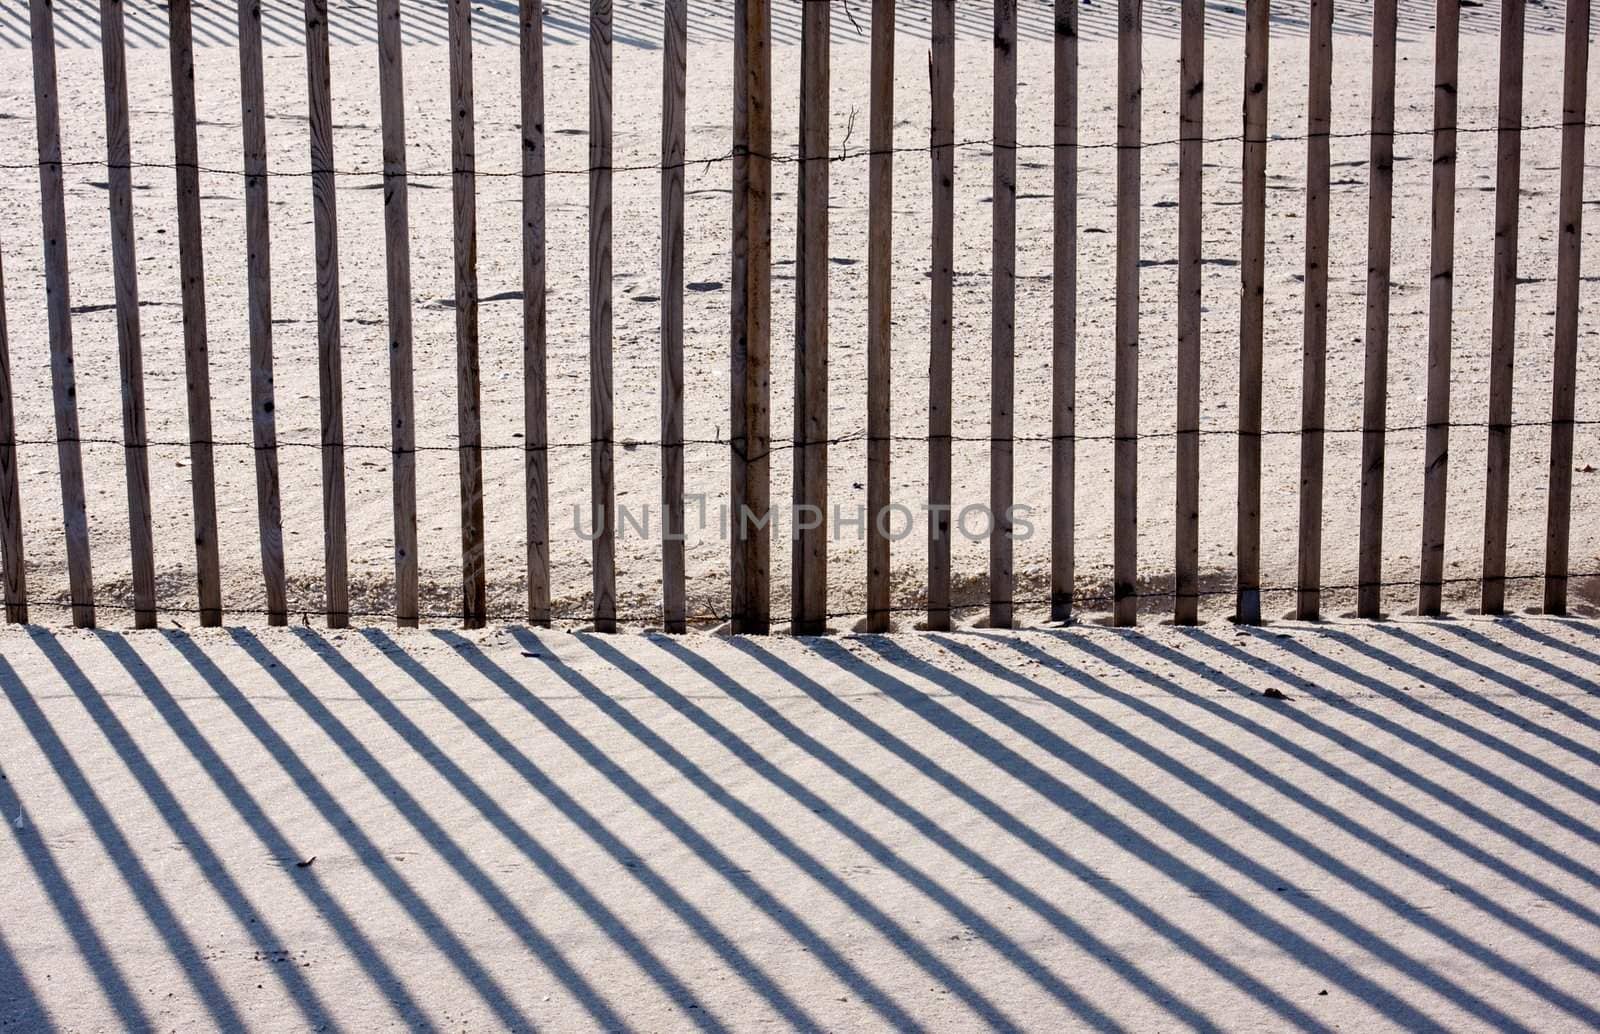 Fence, Sand, and Shadows by sbonk